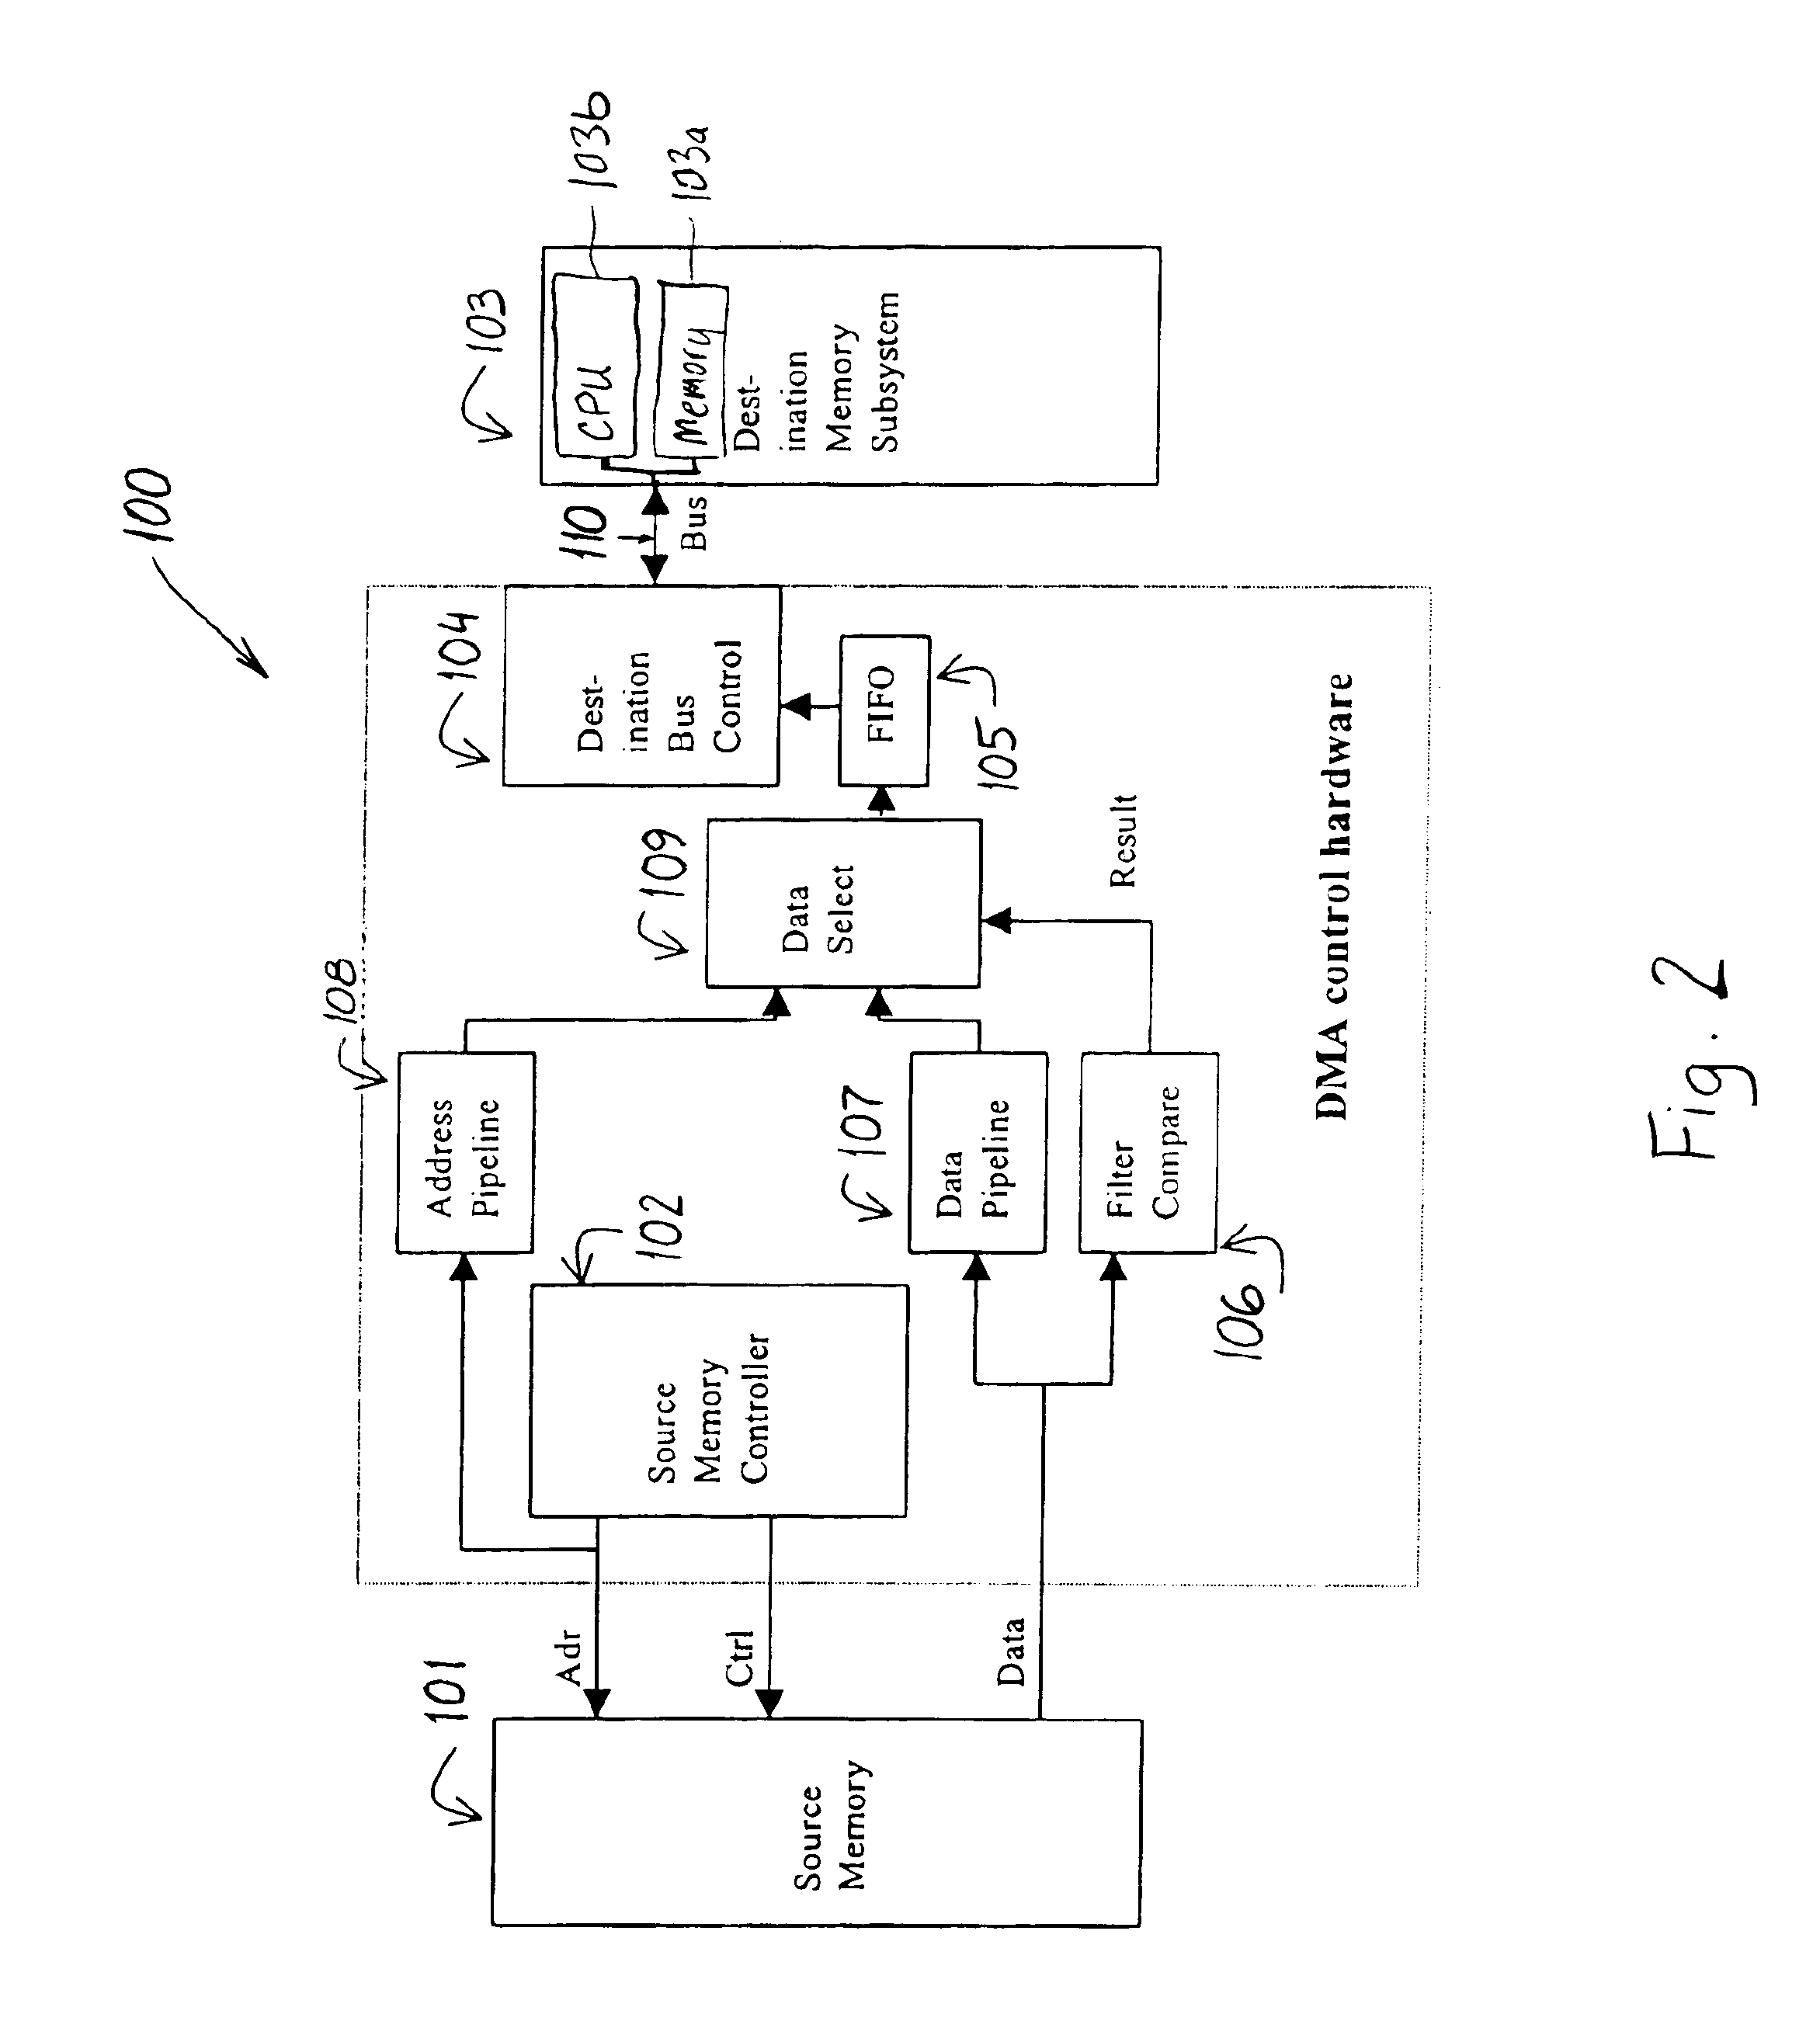 Direct memory access controller and method of filtering data during data transfer from a source memory to a destination memory